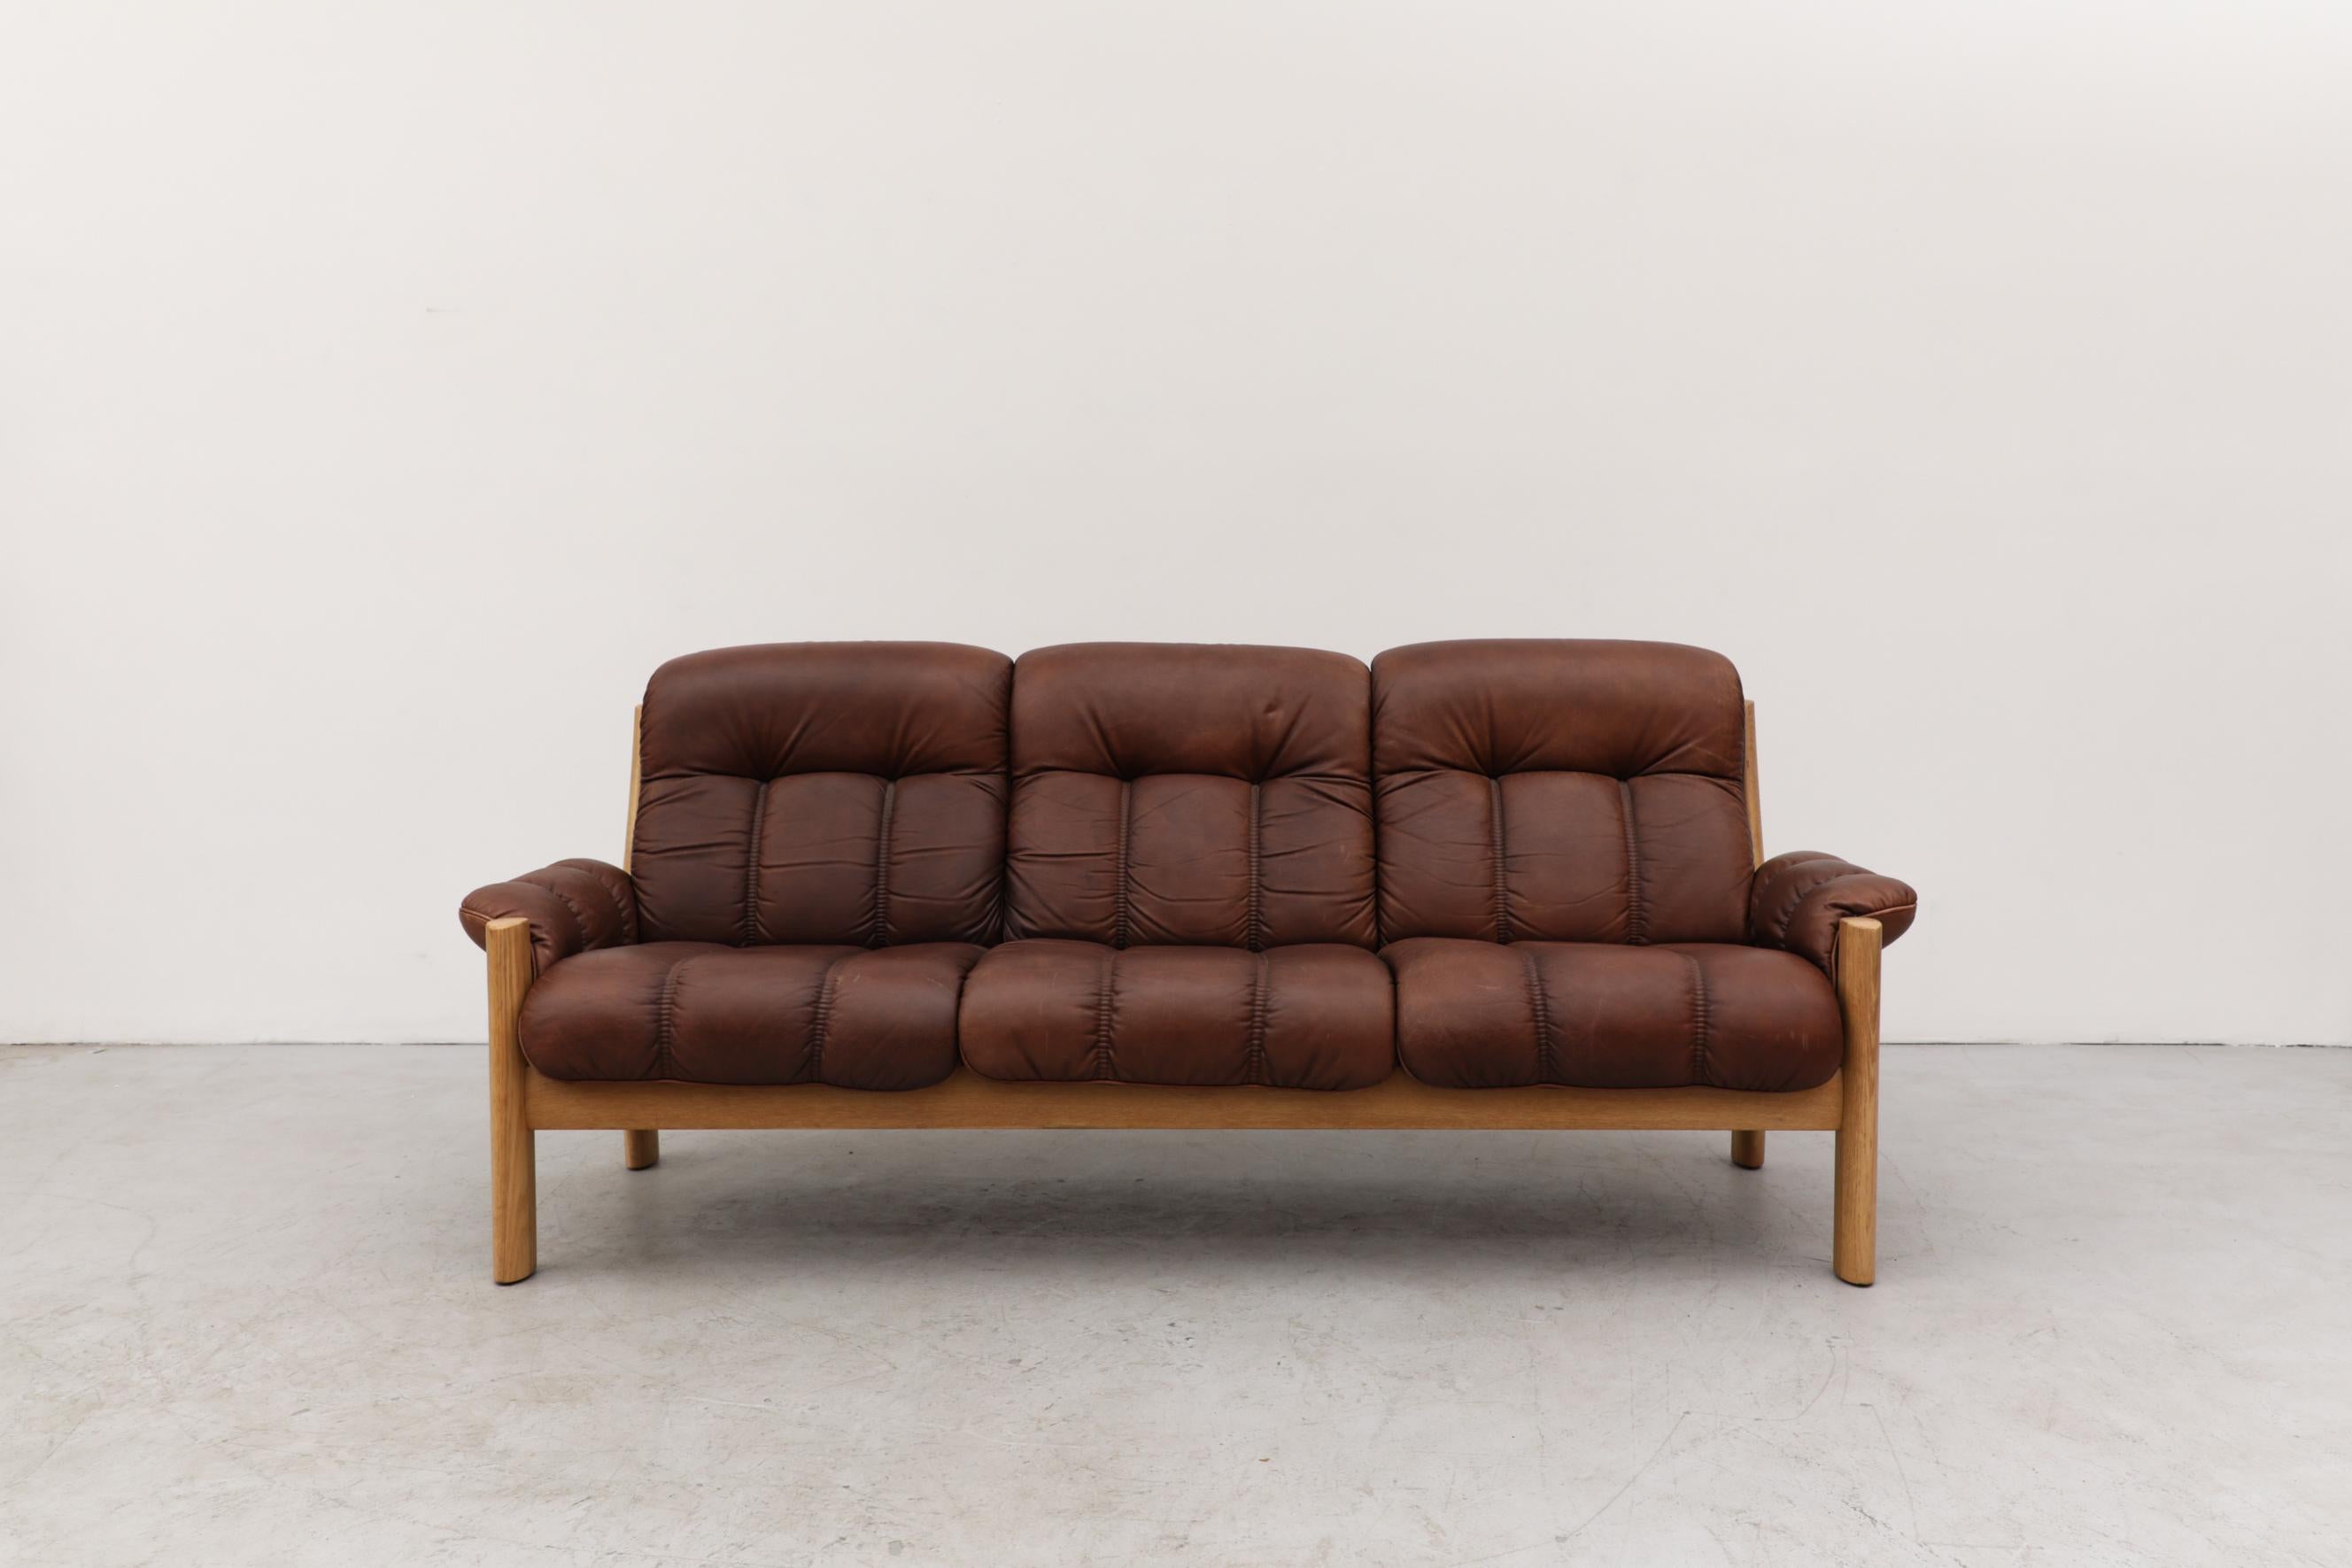 Tufted leather 3 seater oak sofa with a great patina by Finnish design company, Asko. The leather is in original condition and has some scratching and wear, consistent with its age and use.